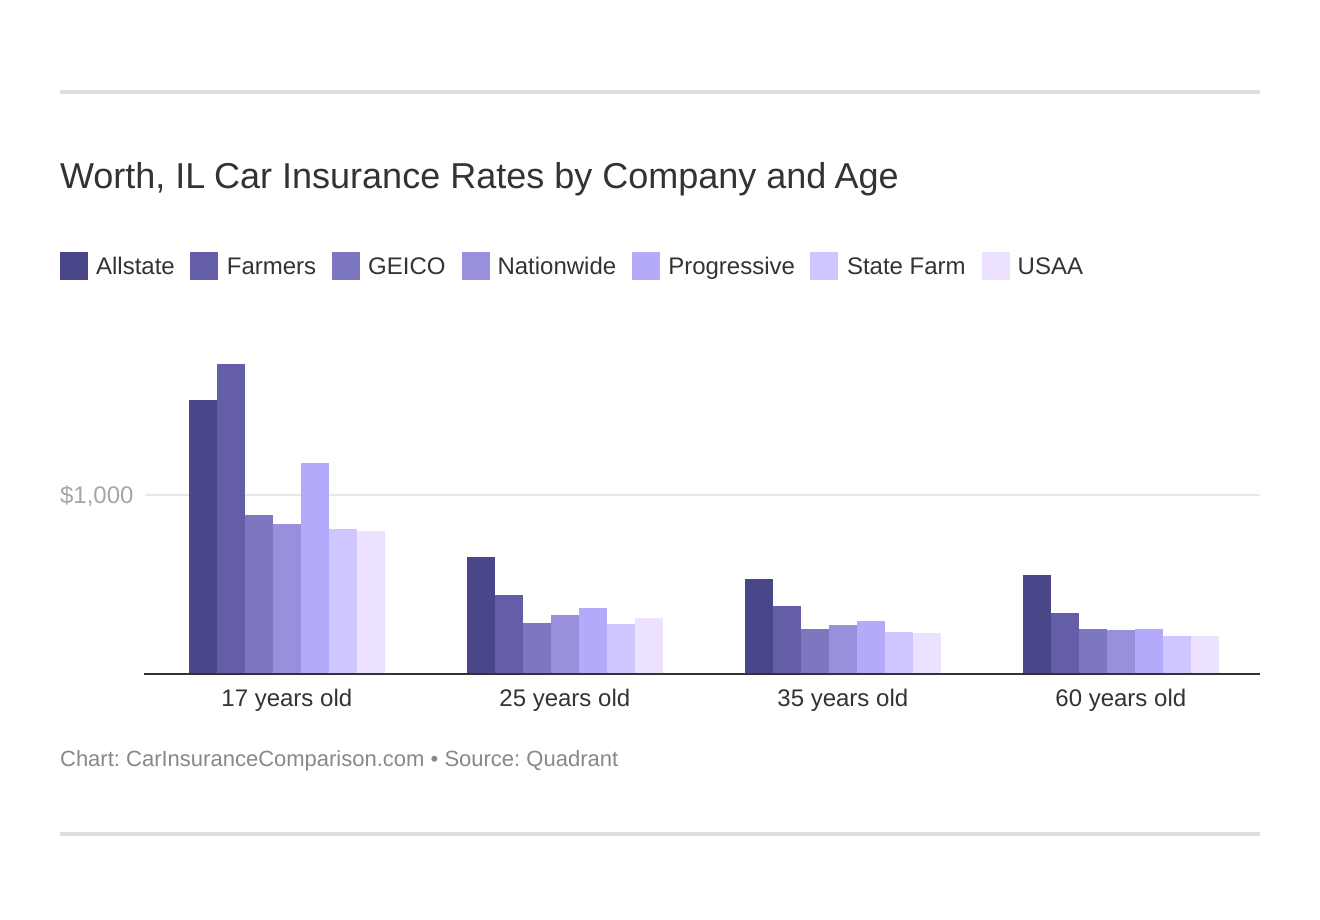 Worth, IL Car Insurance Rates by Company and Age